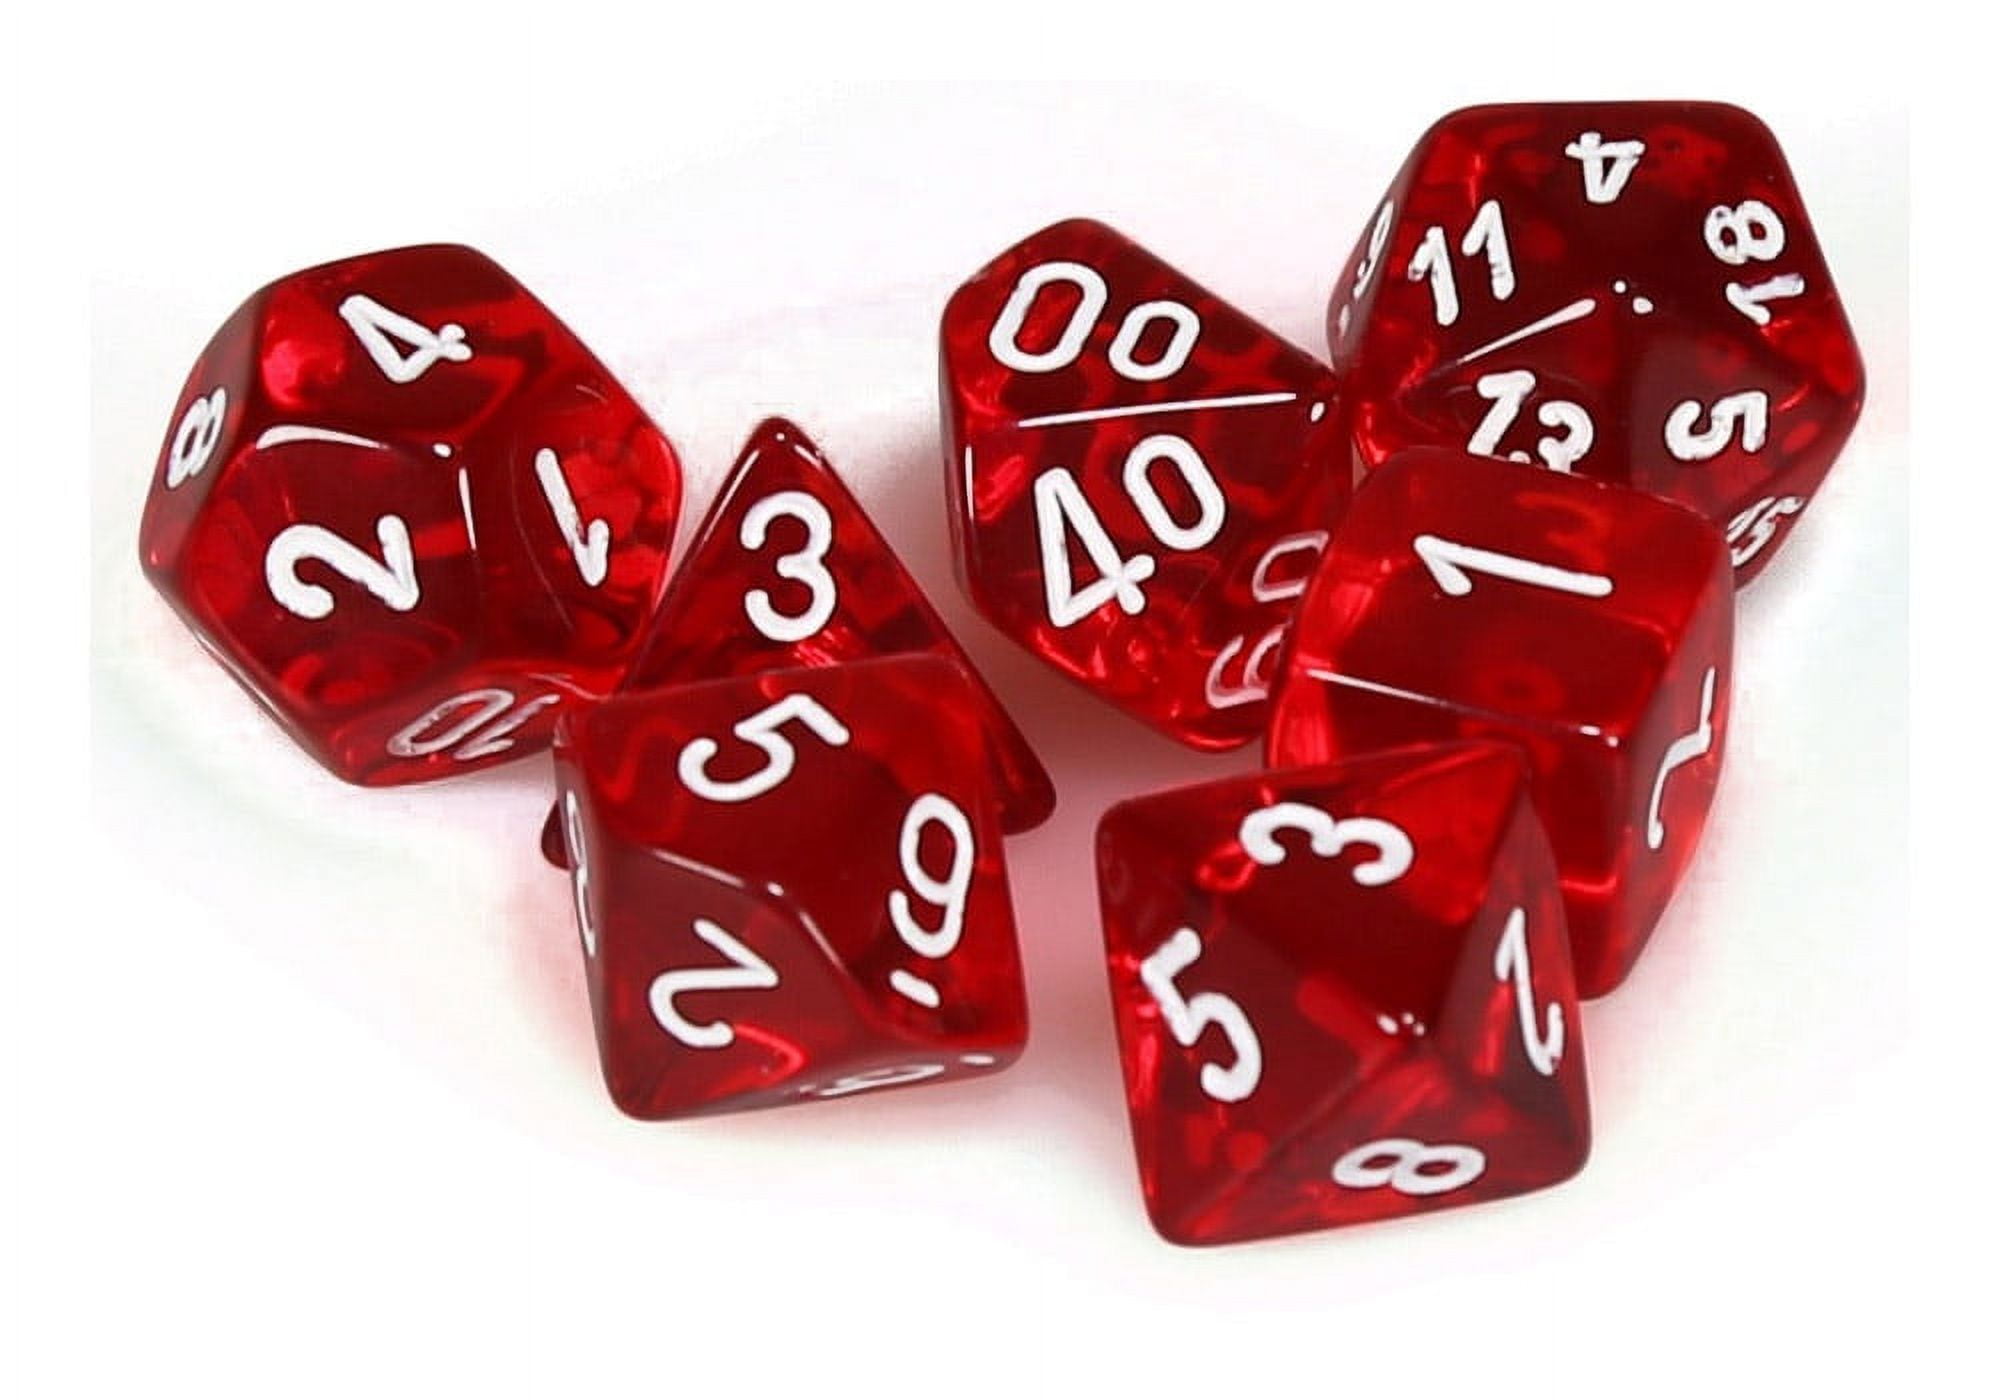 Manufacturing Chx23074 Red Translucent Dice With White Numbers - Set Of 7